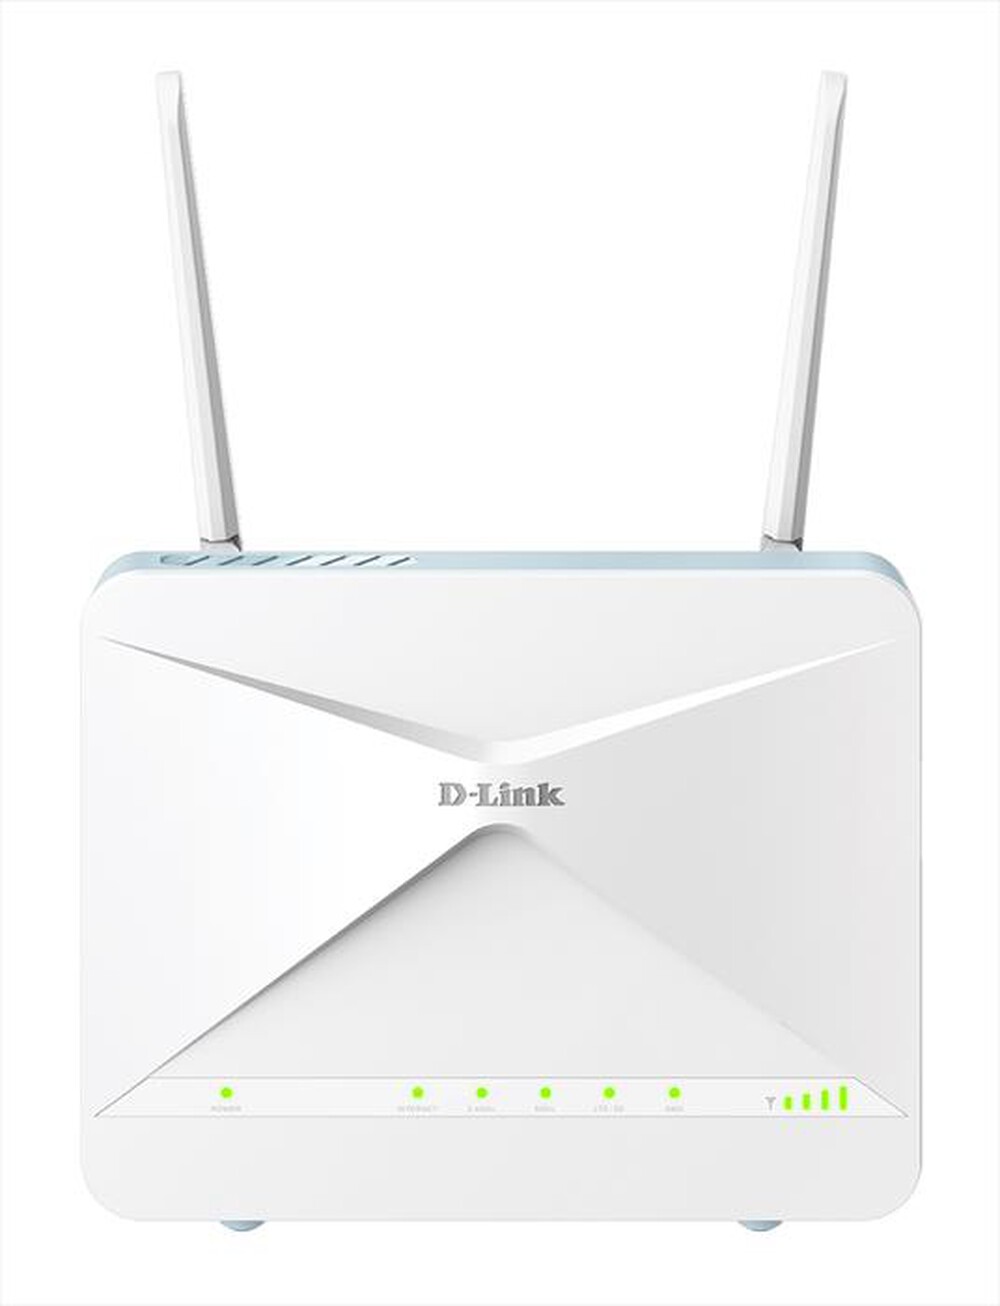 "D-LINK - Router G415-BIANCO"